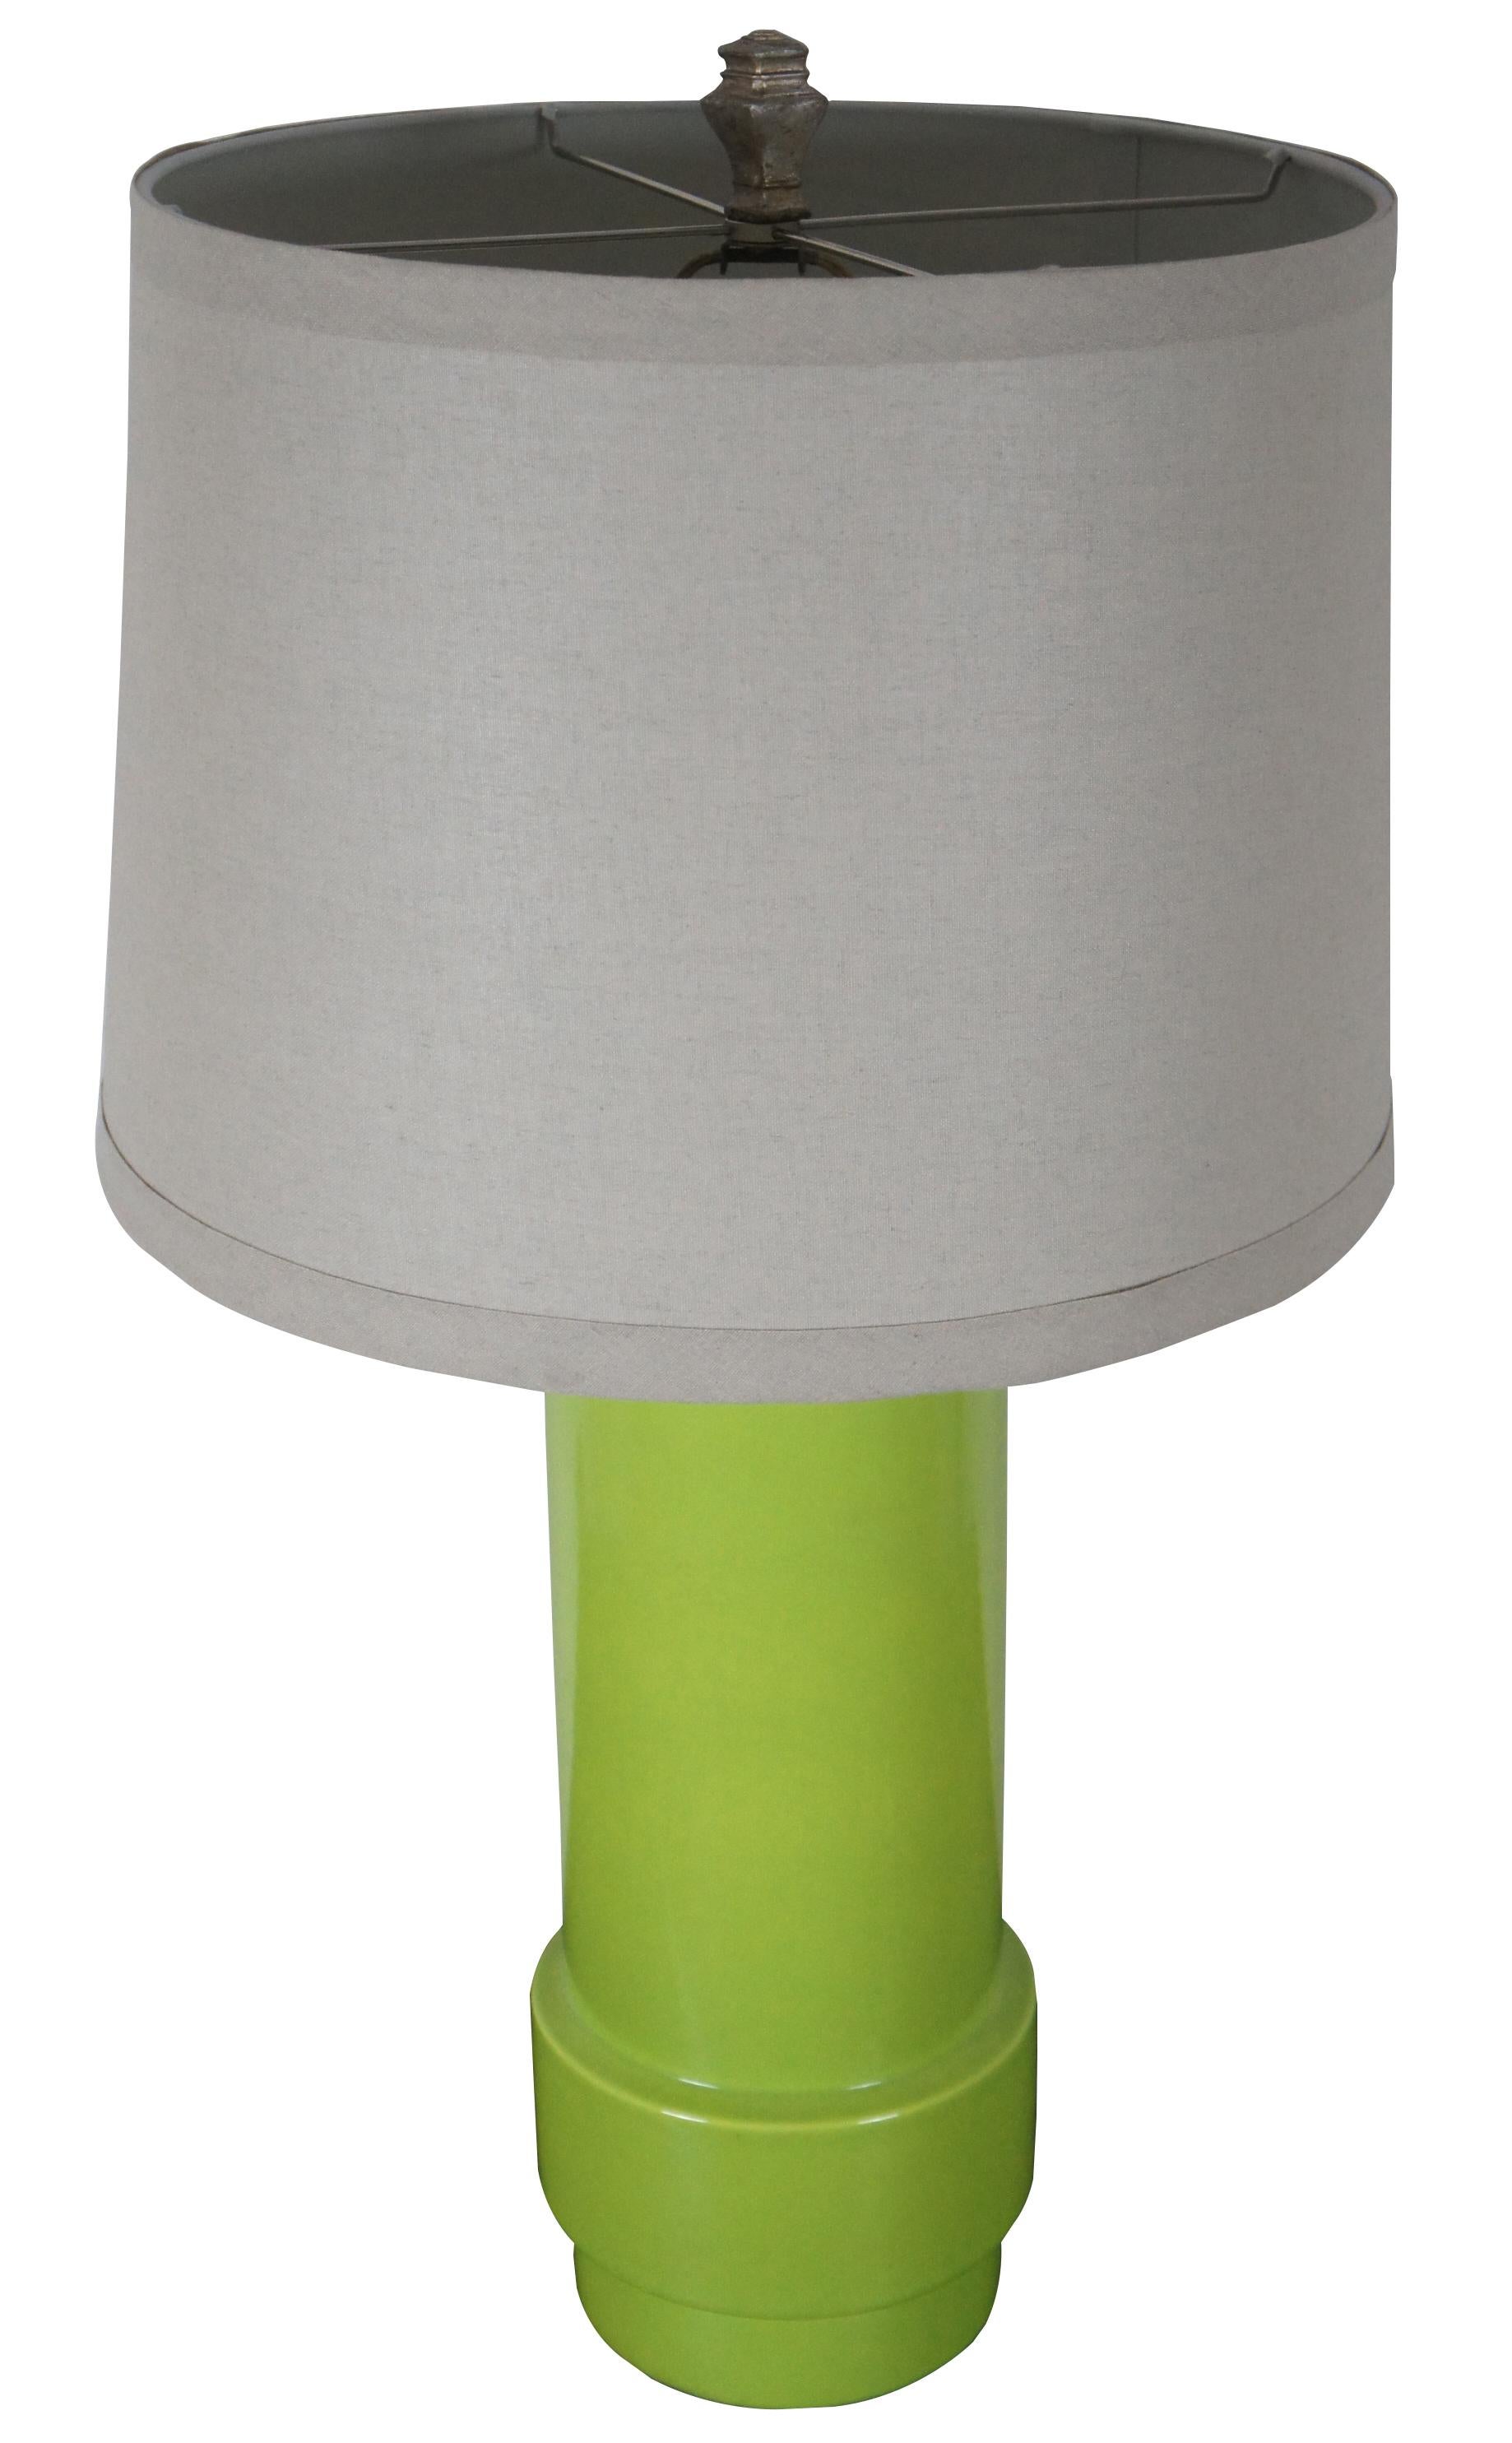 Mid-Century Modern lime green porcelain table lamp with linen shade and resin finial.

Measures: 7” x 22.25” / Shade - 18” x 13” / Height to top of finial – 34” (Diameter x Height).